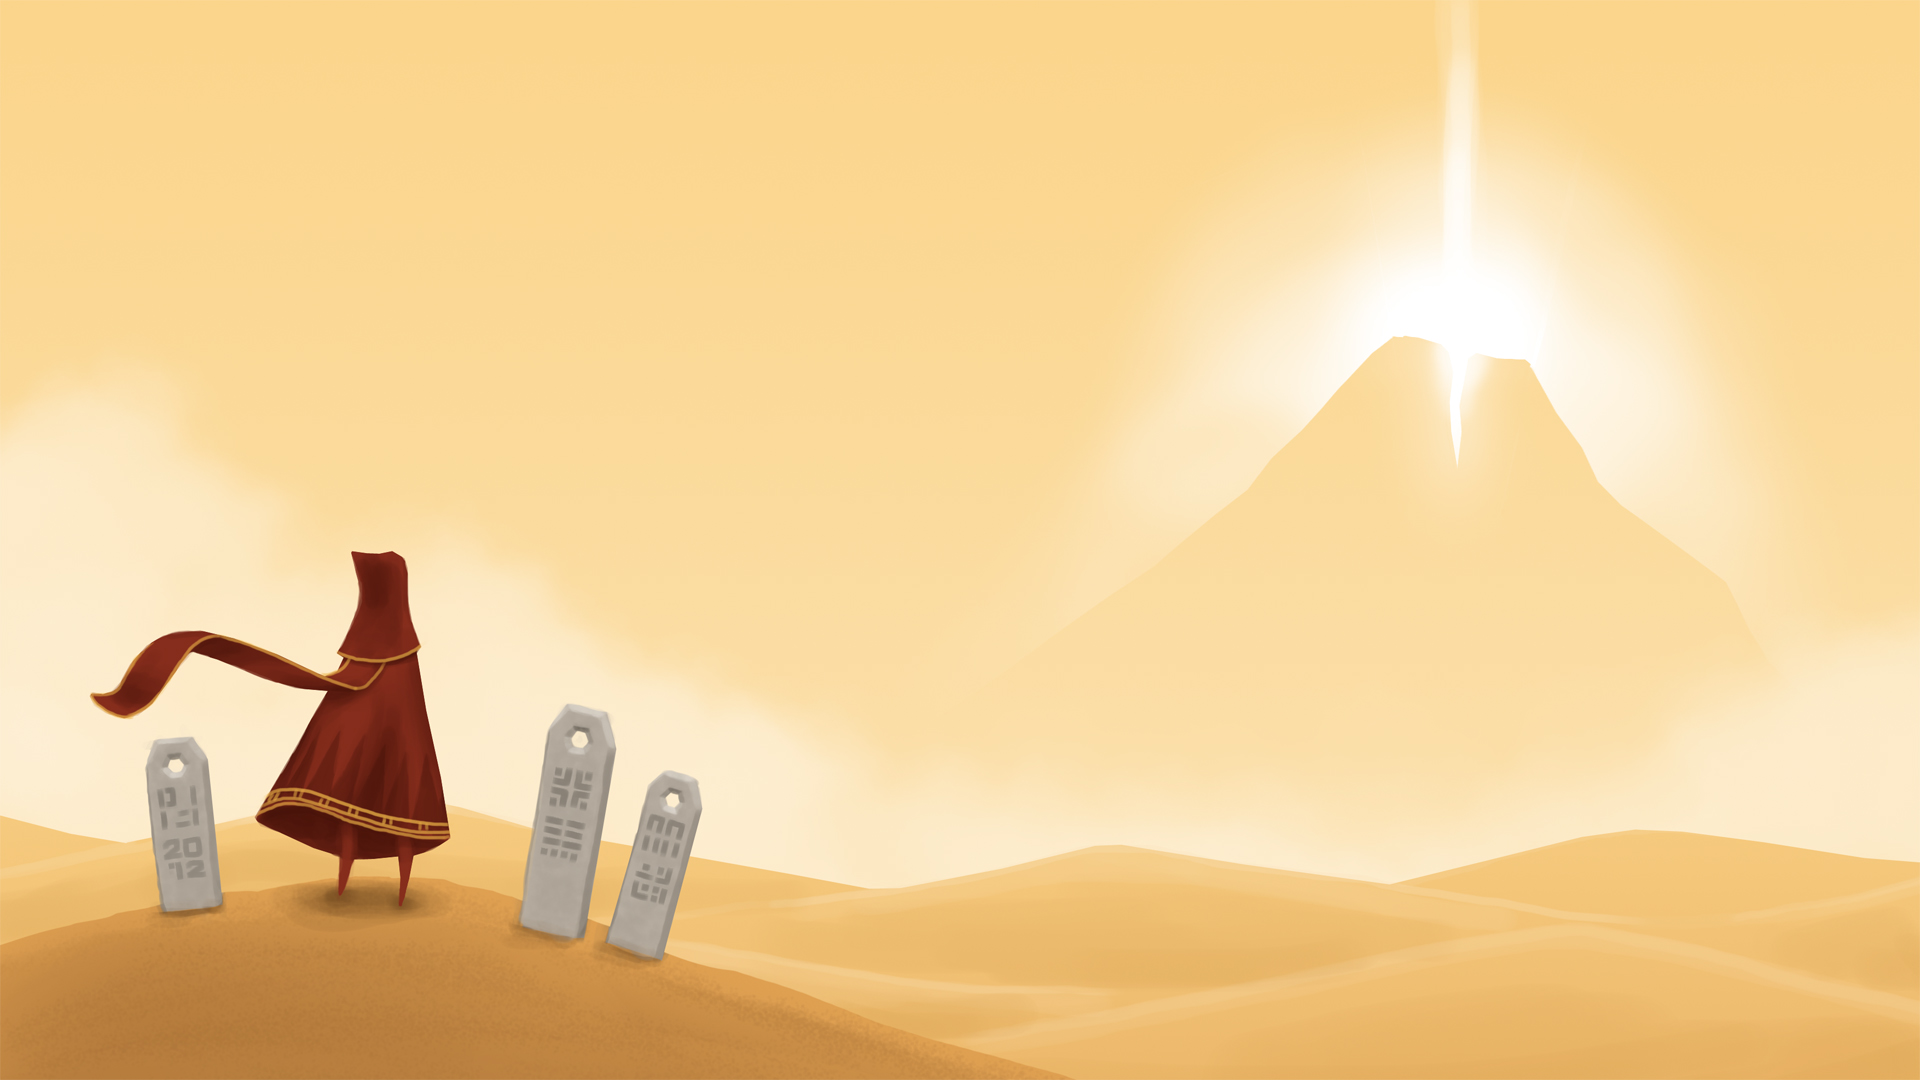 video game, journey